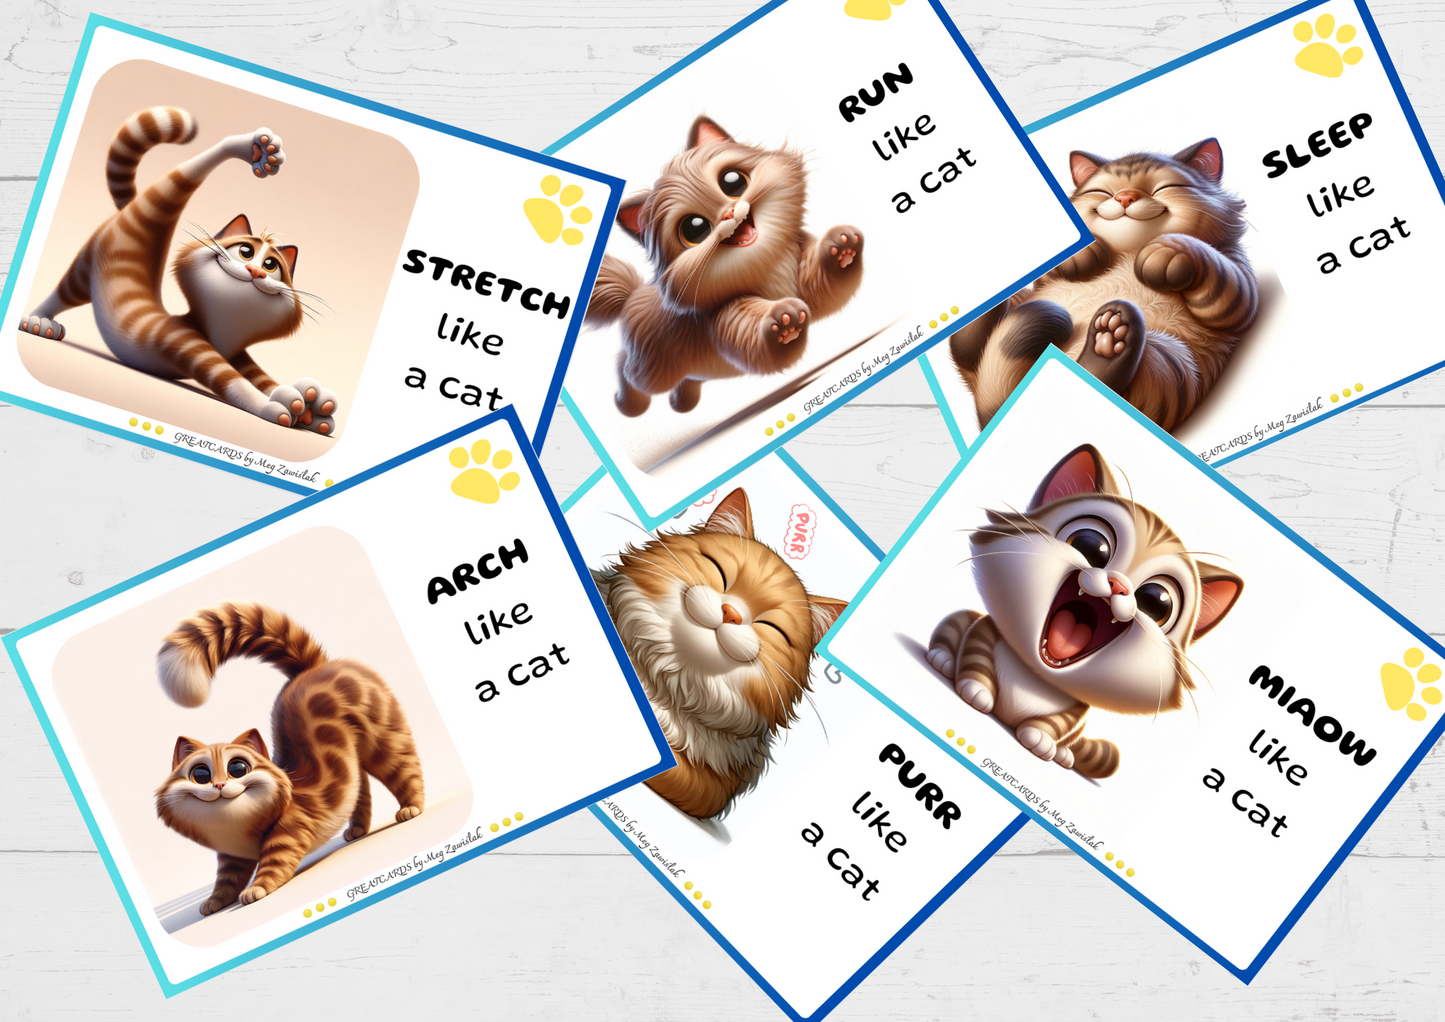 Greatcards - Cat MIMING FLASHCARDS - Cat Day!